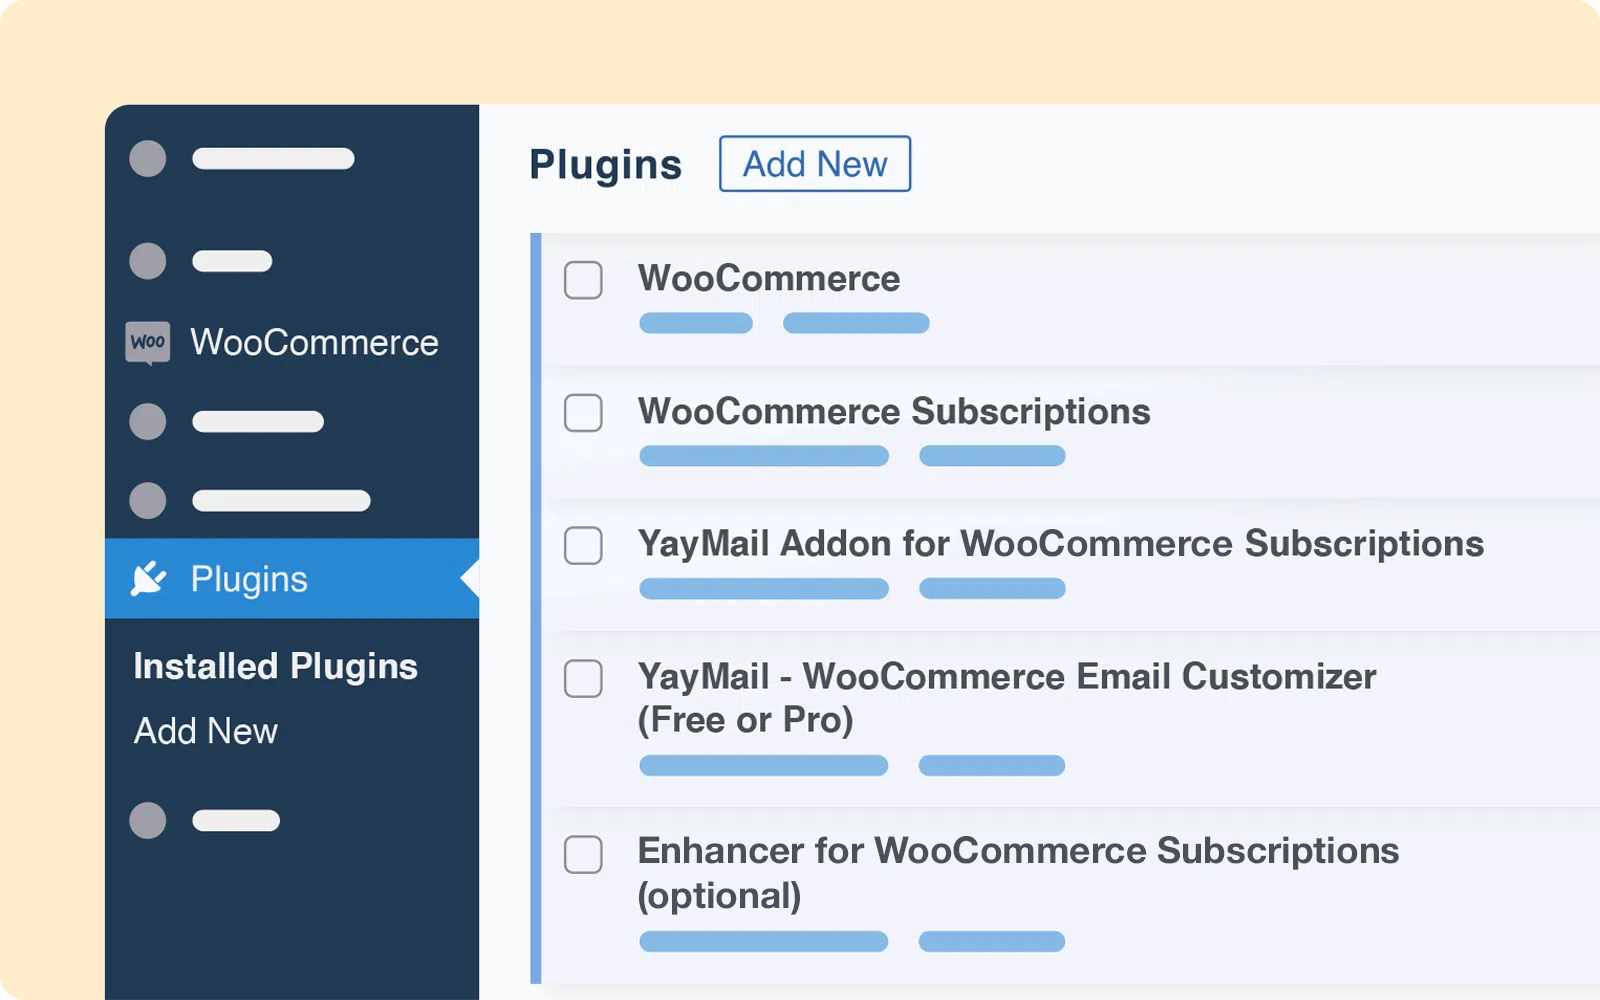 yaymail addon for woocommerce subscriptions